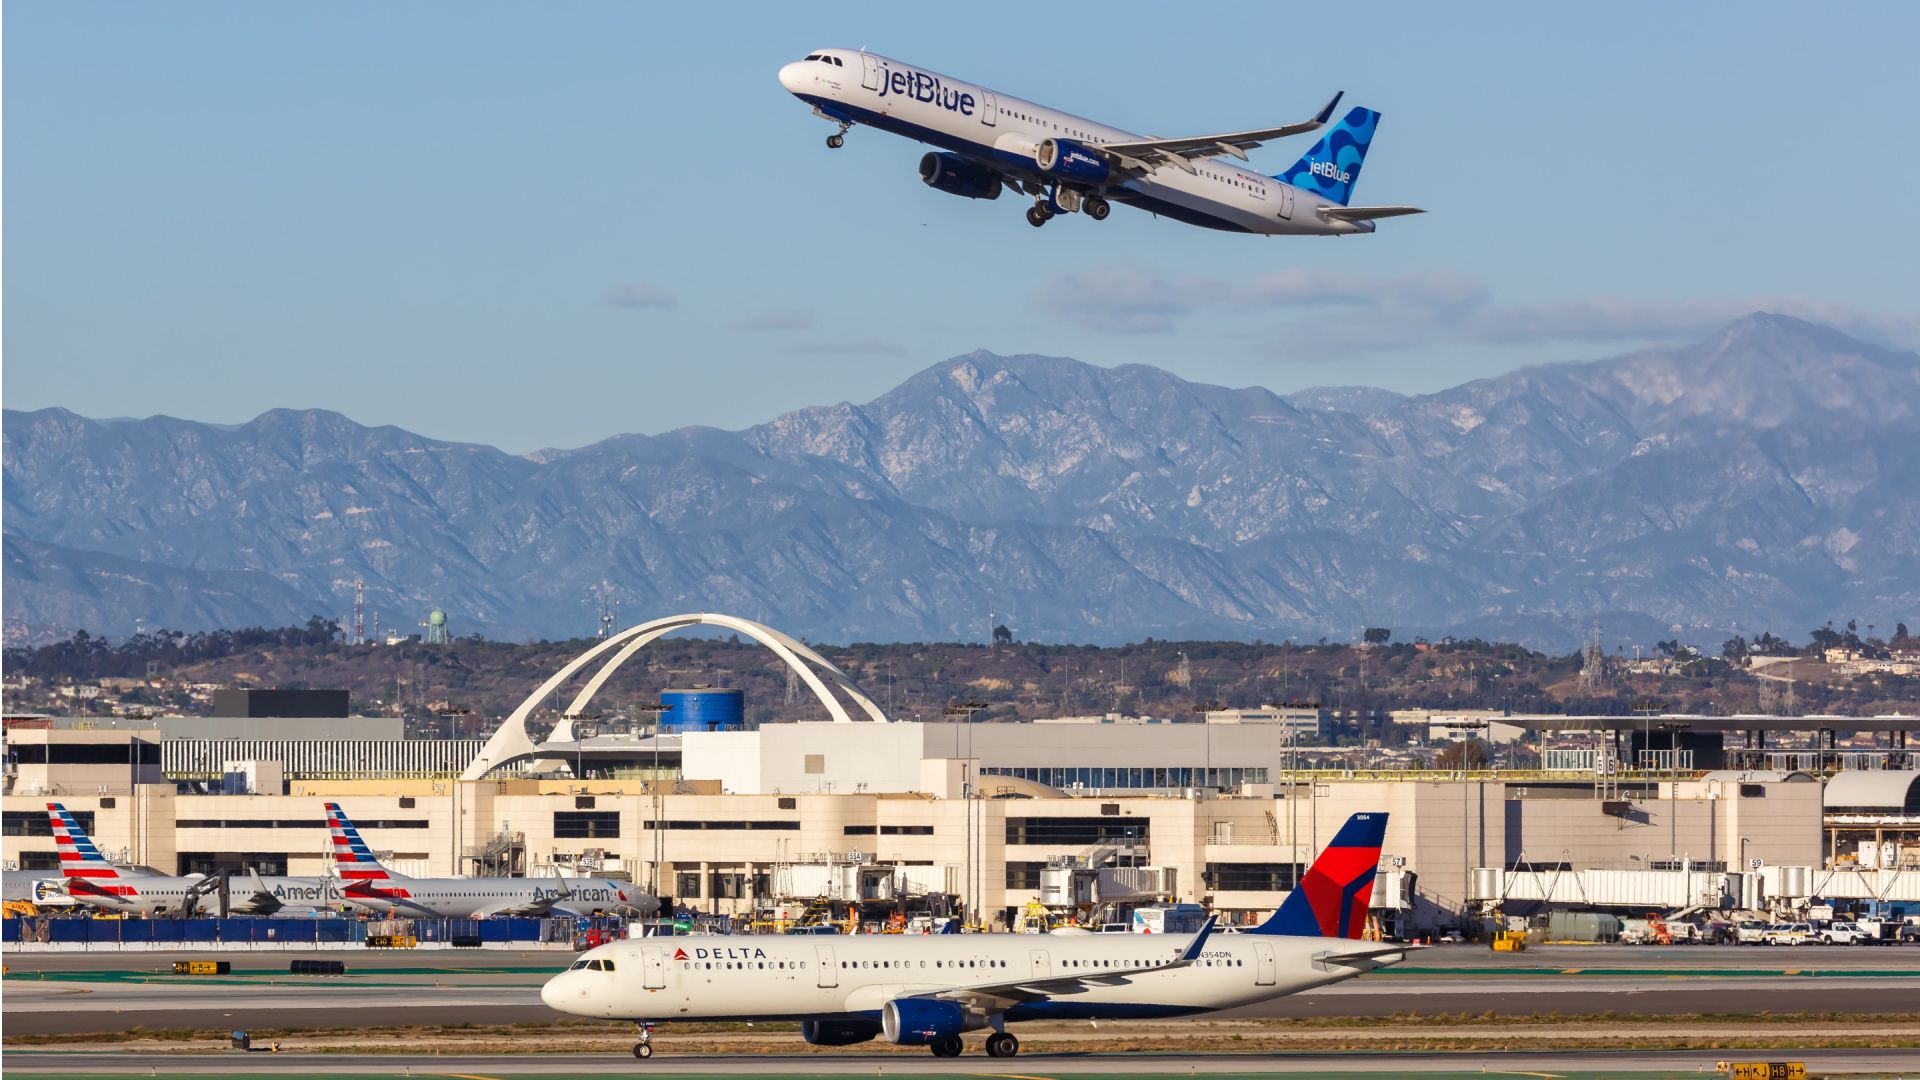 American Airlines, Delta Air Lines, and JetBlue aircraft at Los Angeles International Airport.